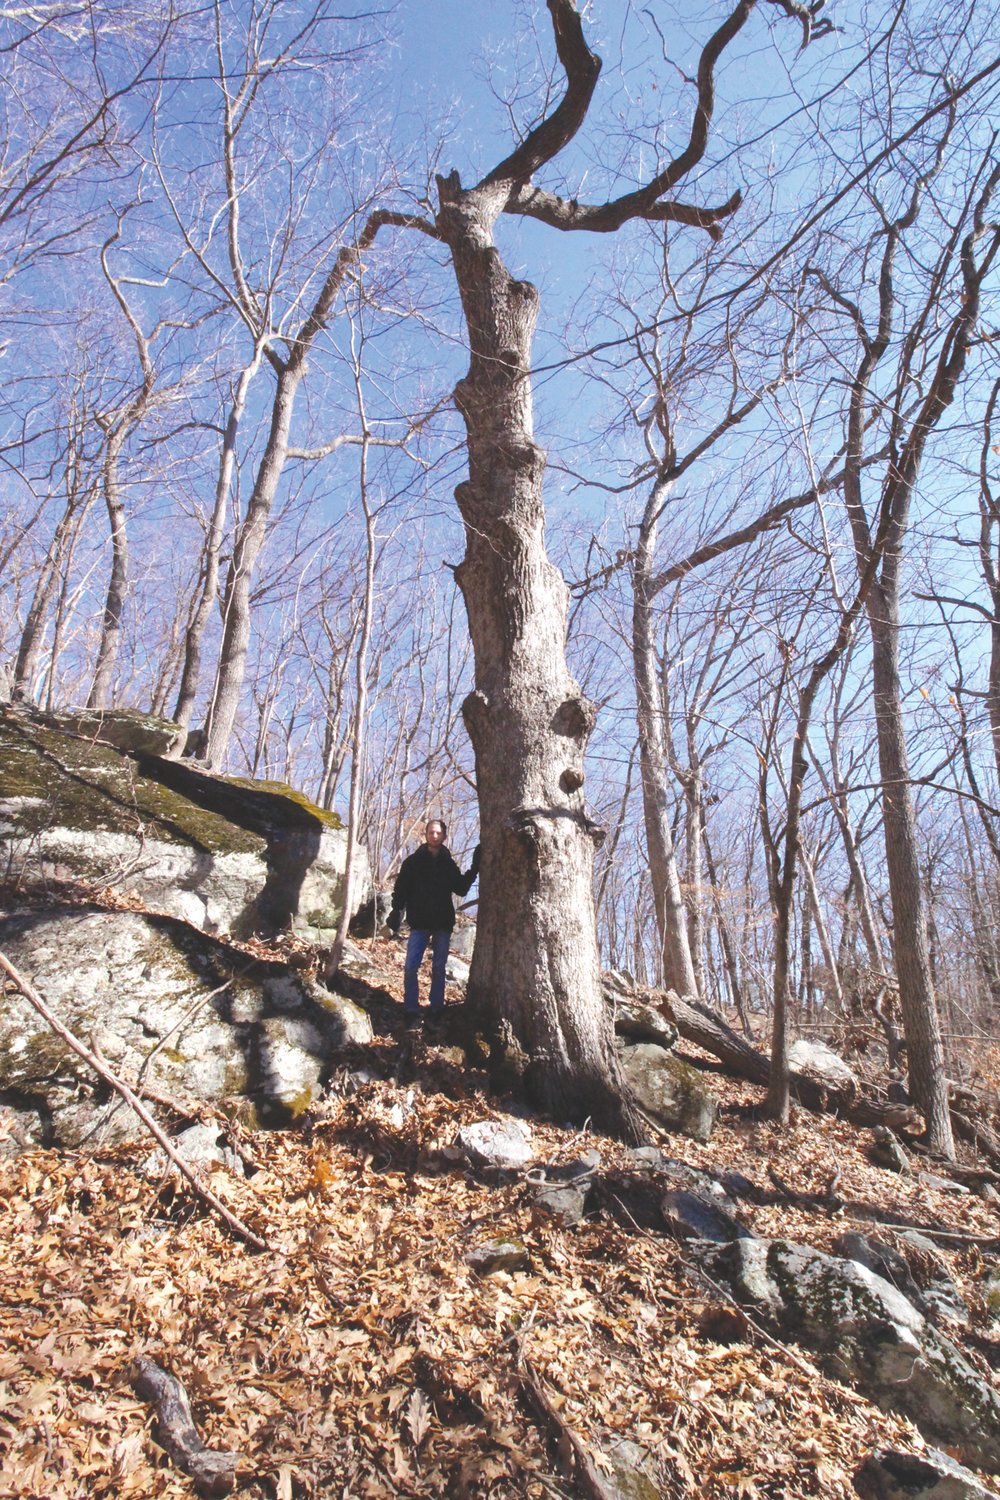 IT’S GOT TO BE 300 YEARS OLD: Nathan Cornell stands by a giant white oak in the canyon.